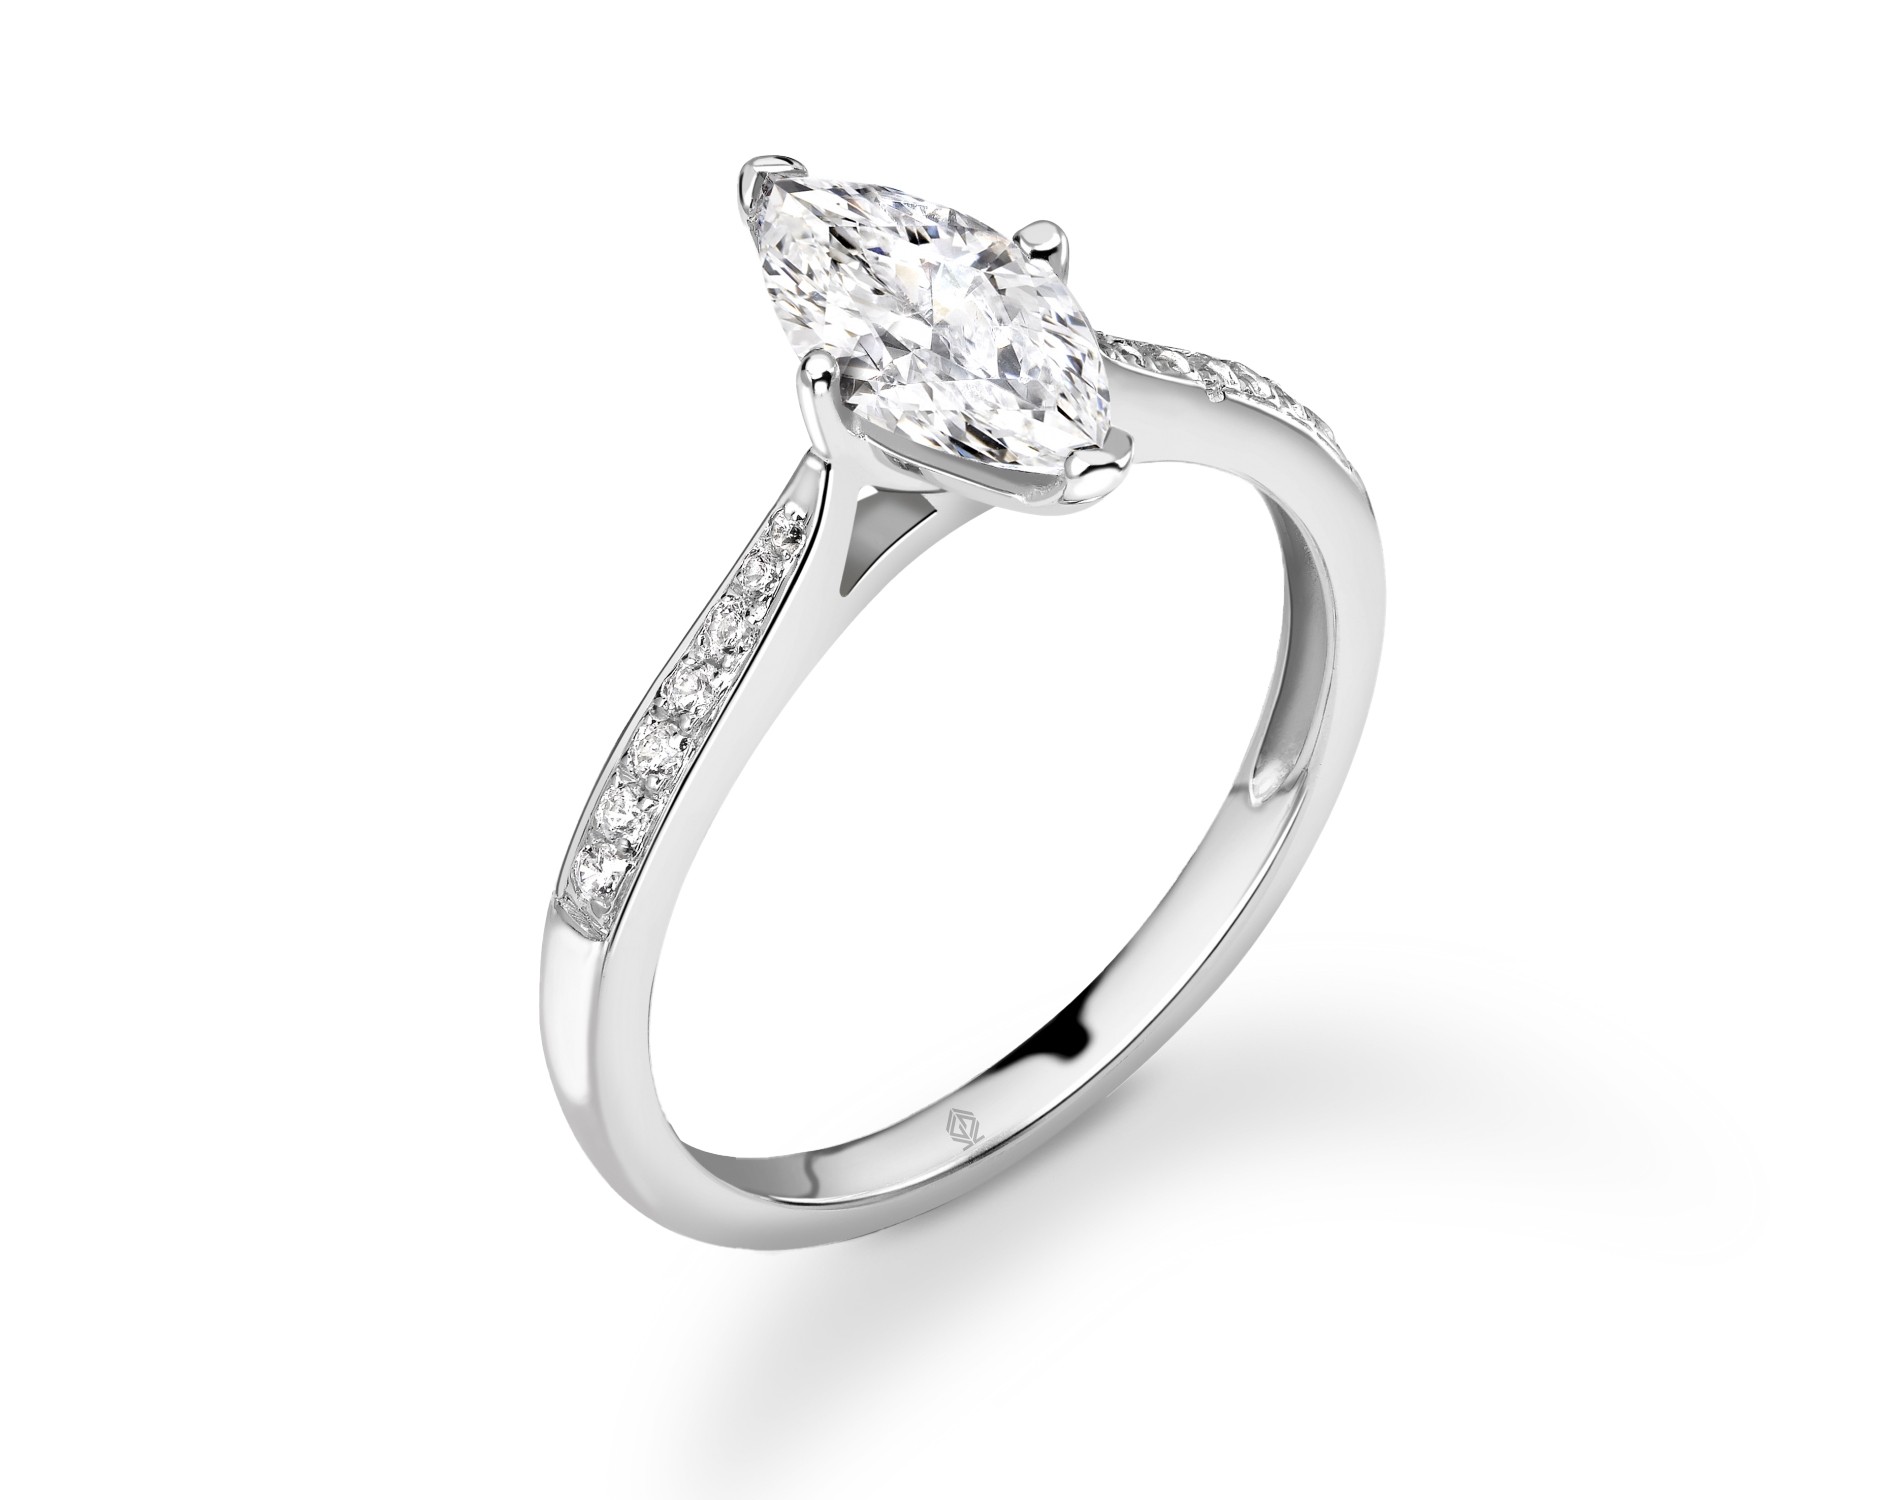 18K WHITE GOLD MARQUISE CUT DIAMOND ENGAGEMENT RING WITH SIDE STONES CHANNEL SET